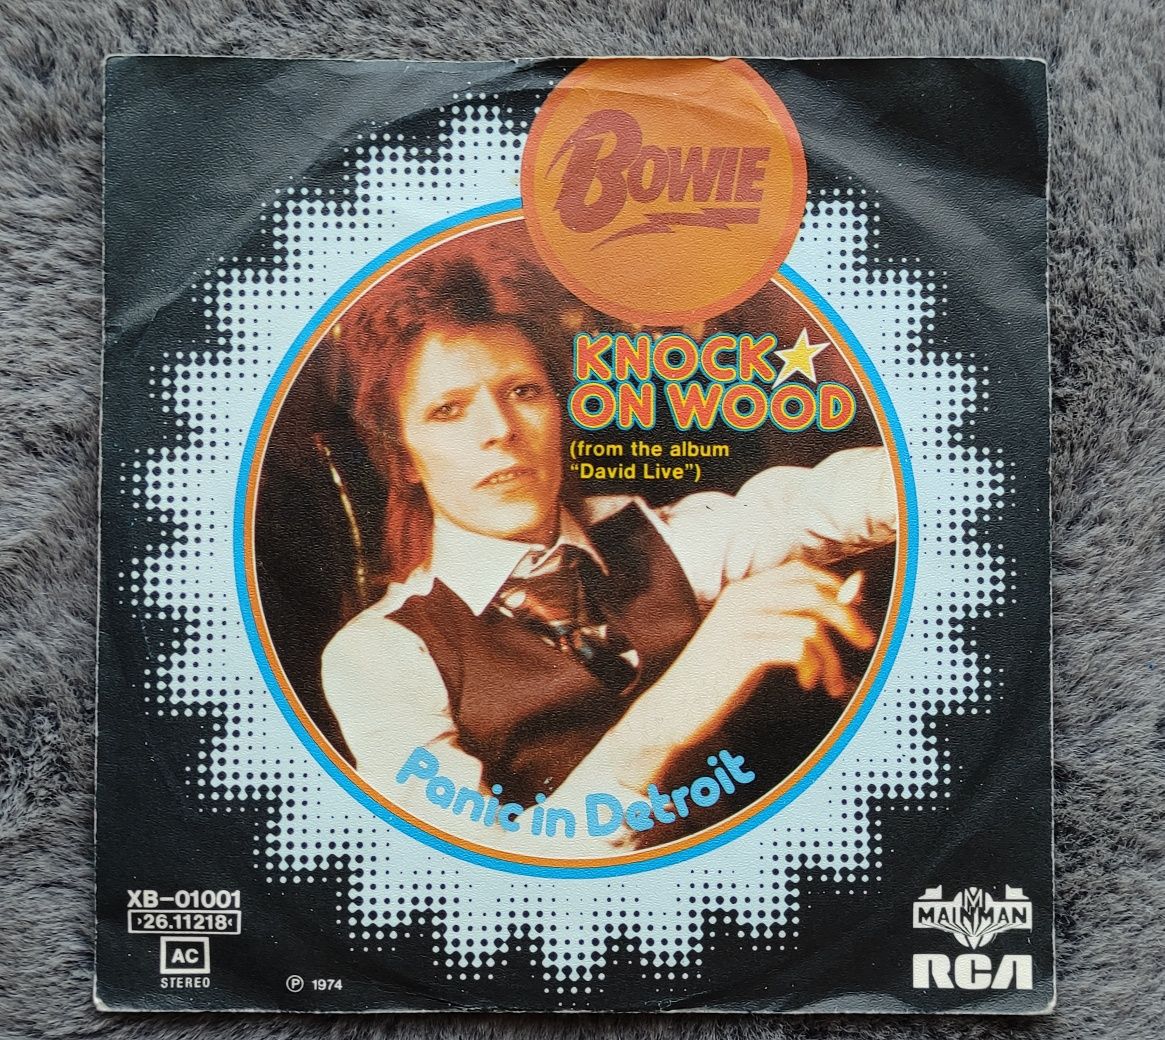 David Bowie – Knock On Wood Panic in Detroit